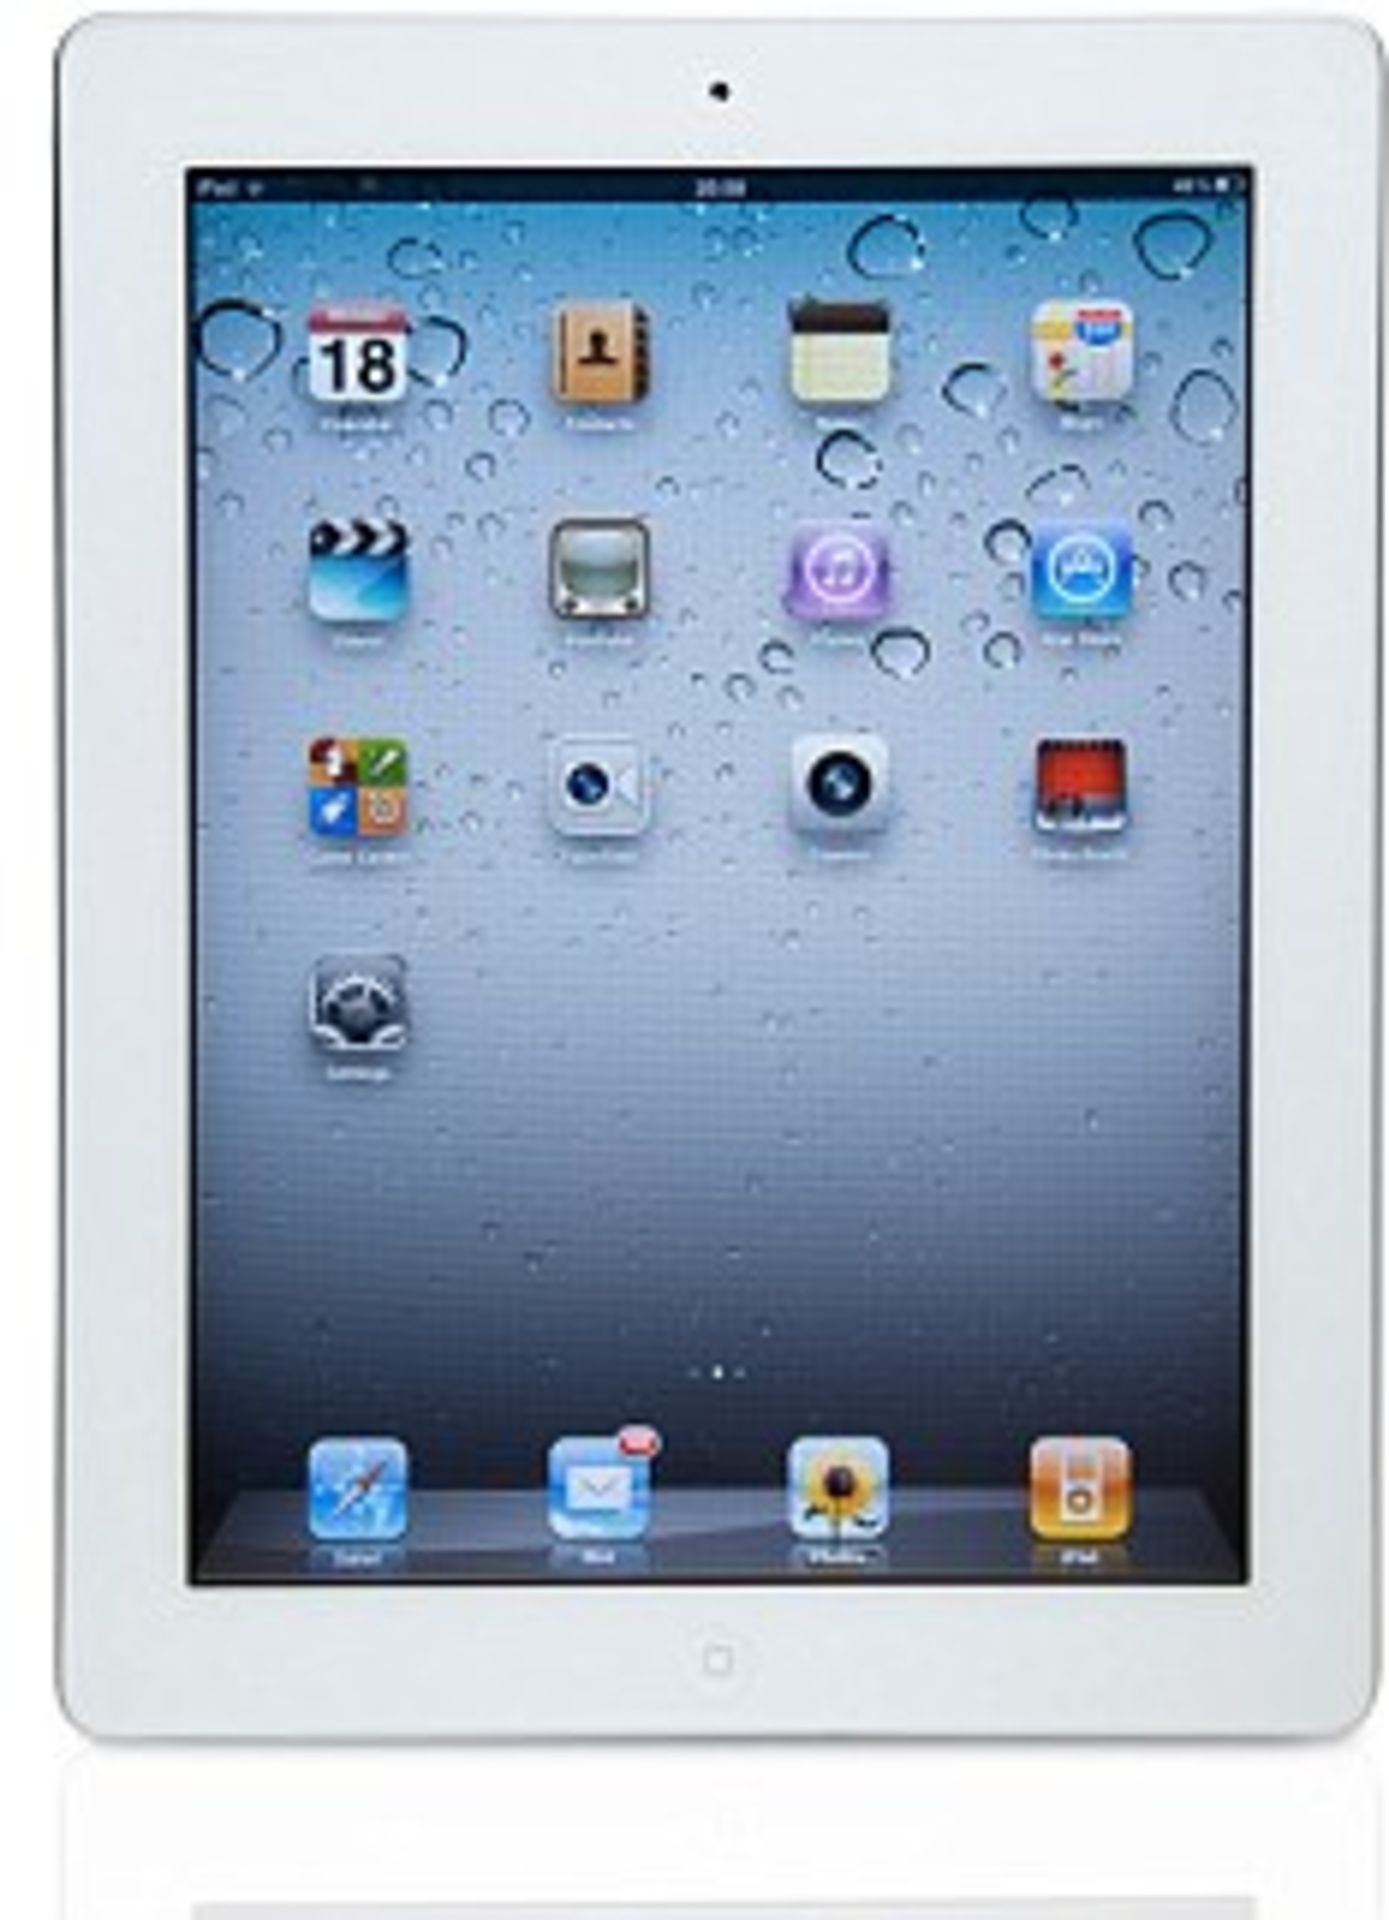 V Apple iPad 2 16GB White Front & Rear Camera 3G & Wifi Lead & Charger Factory Graded Generic Box